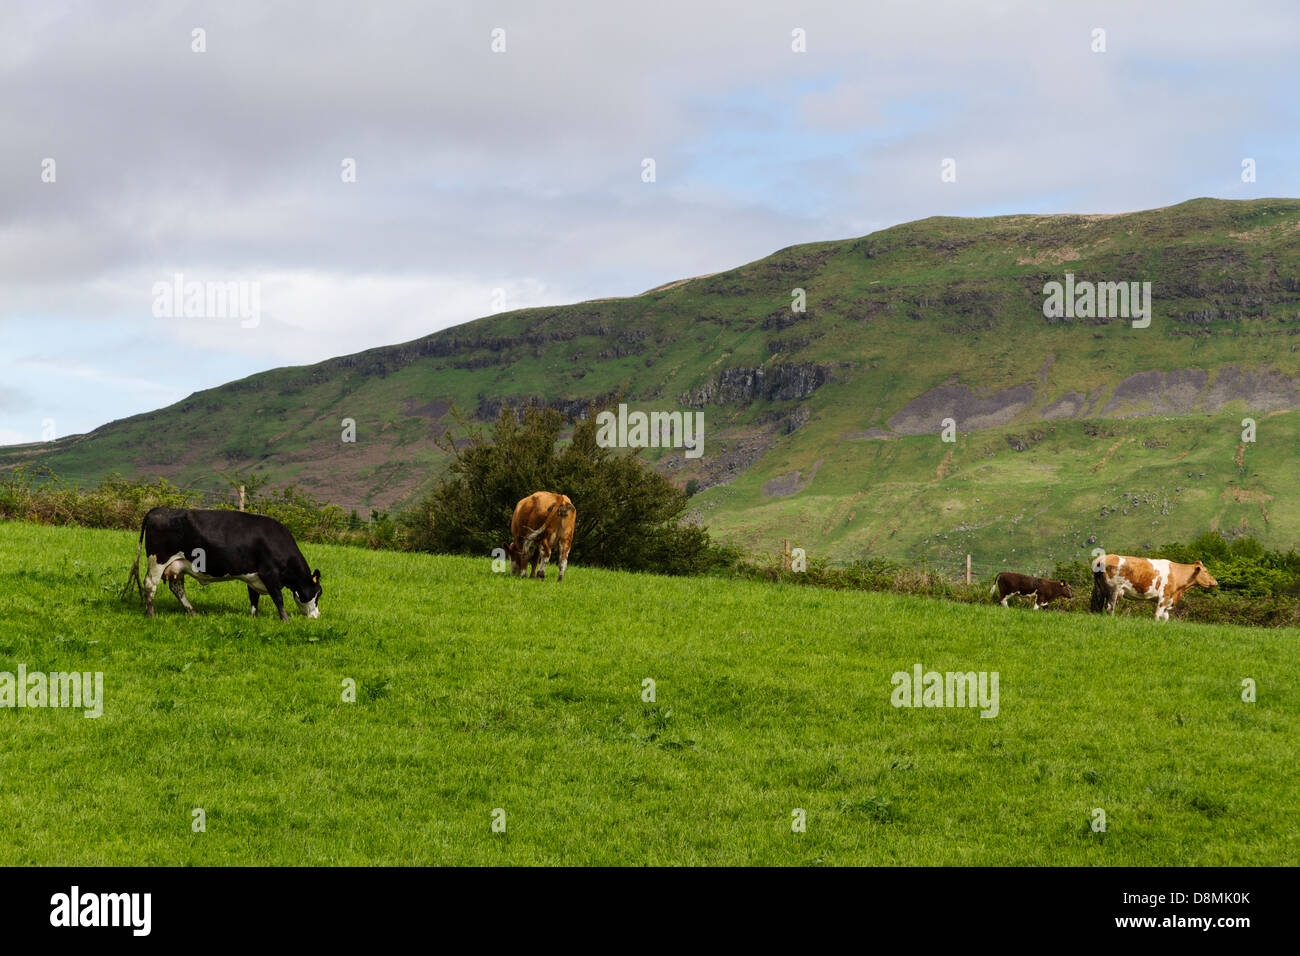 Cows grazing in a field on a hill. Scotland, UK Stock Photo